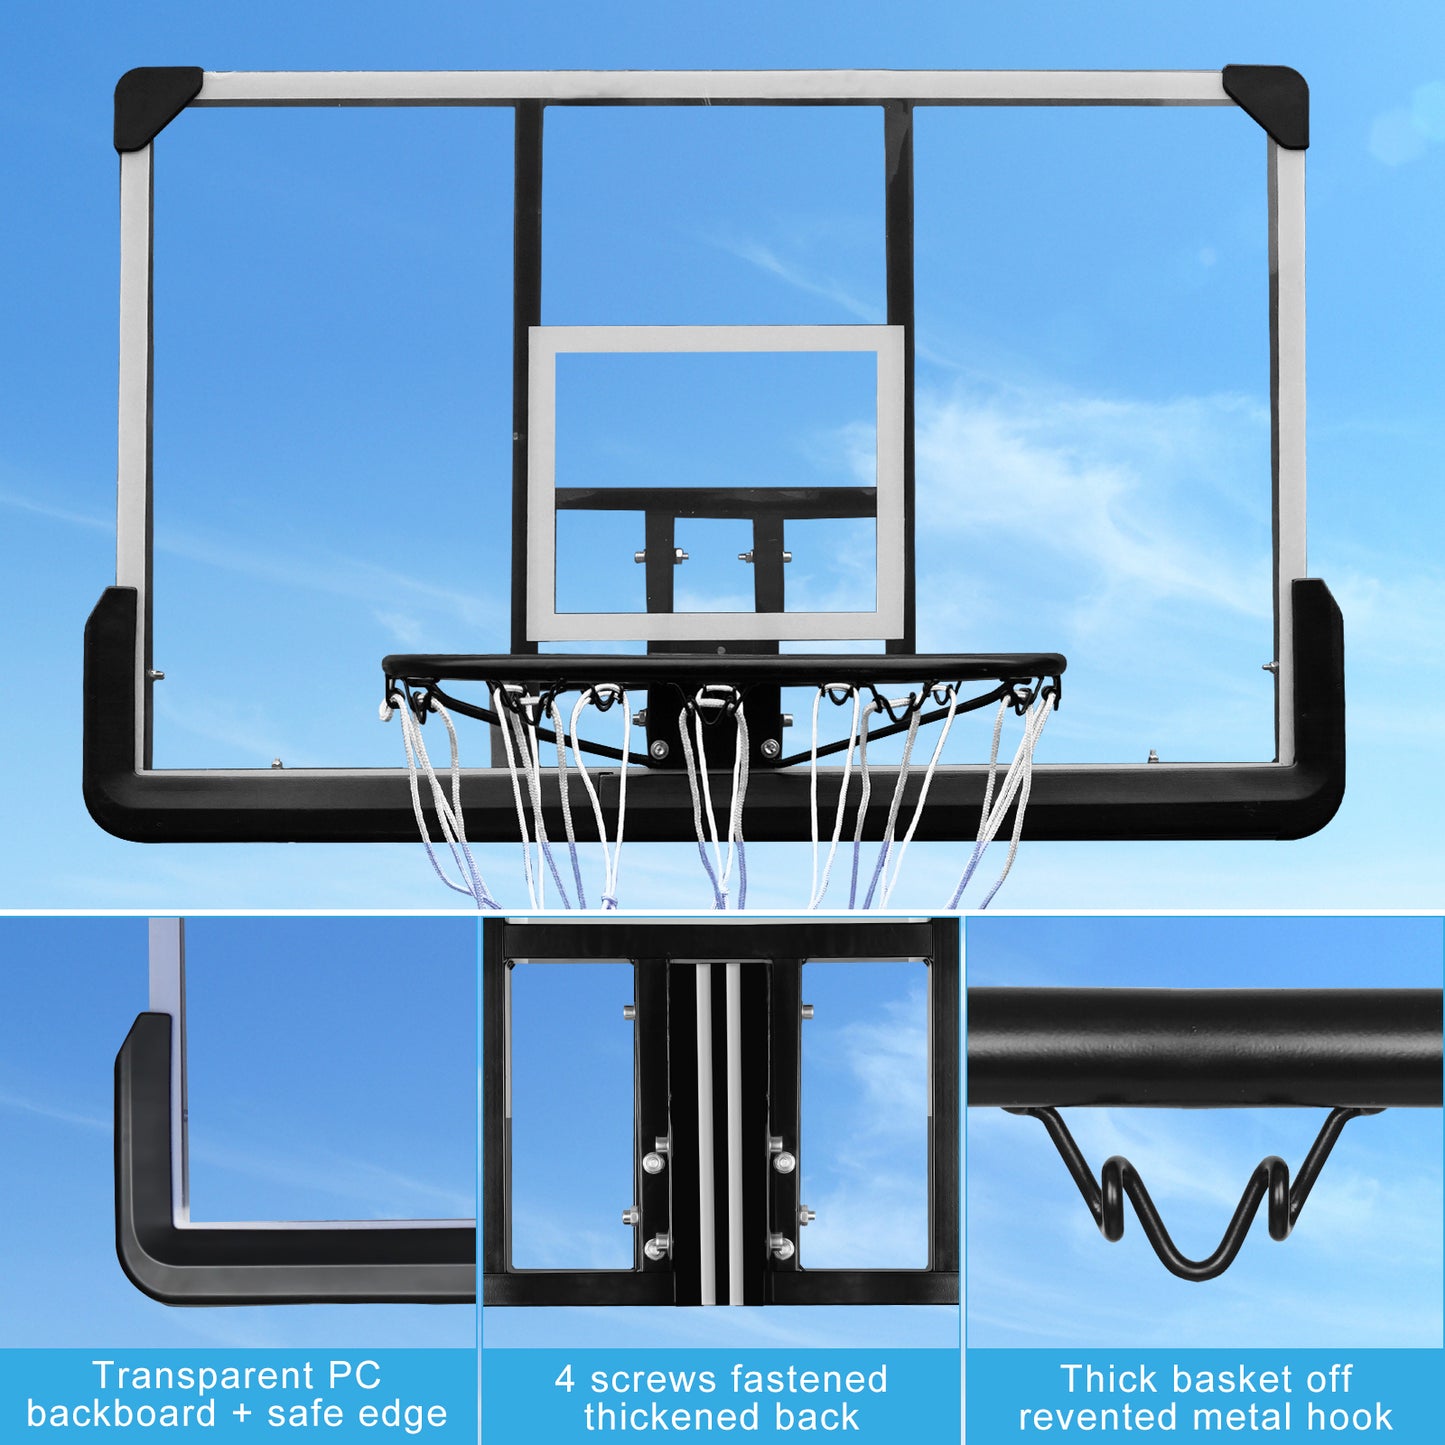 Portable Basketball Hoop & Goal Basketball System Basketball Equipment Height Adjustable 7ft - 10ft with 44 Inch Backboard and Wheels for Adults Youth Indoor Outdoor